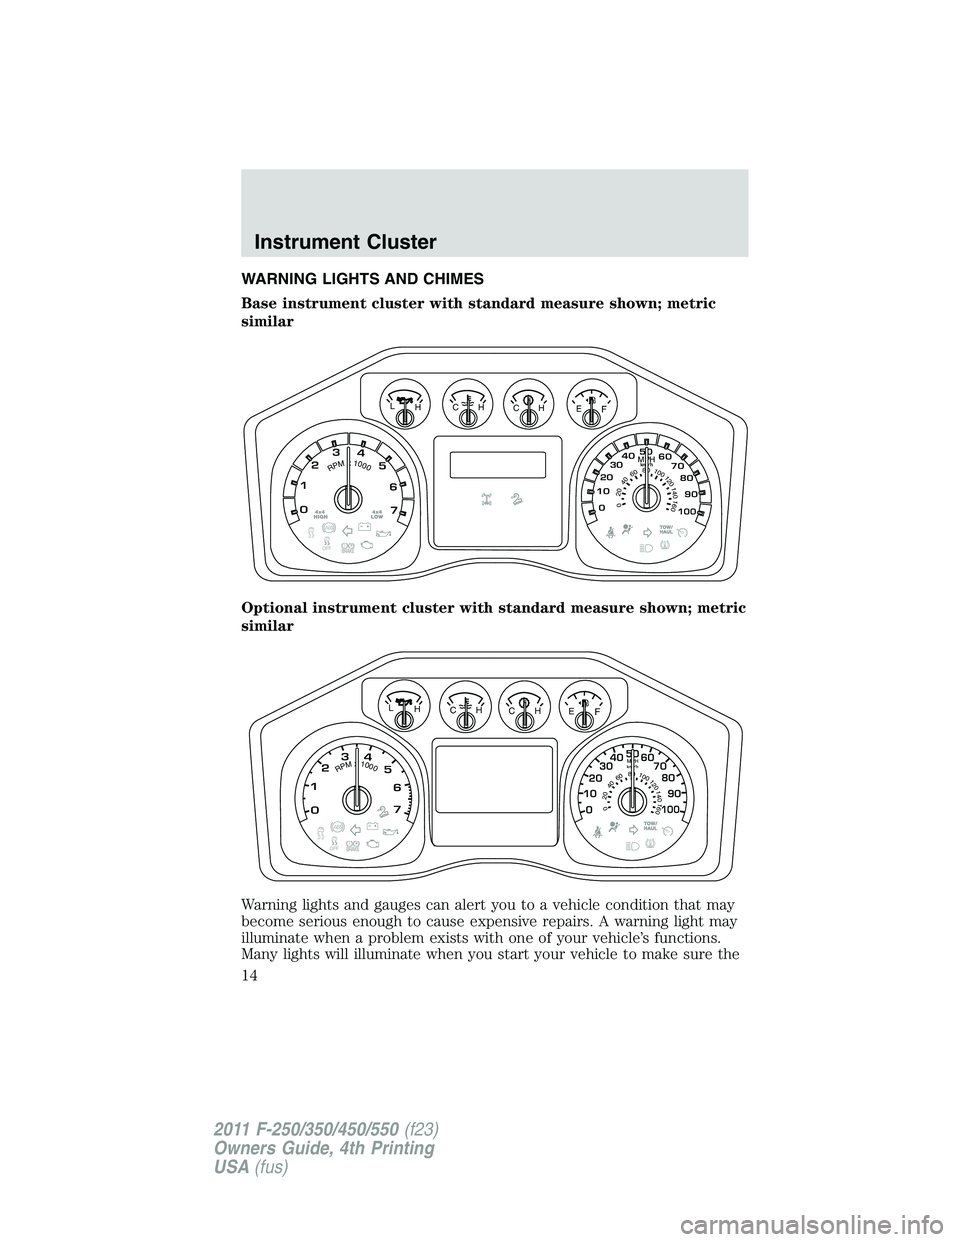 FORD F250 2011  Owners Manual WARNING LIGHTS AND CHIMES
Base instrument cluster with standard measure shown; metric
similar
Optional instrument cluster with standard measure shown; metric
similar
Warning lights and gauges can aler